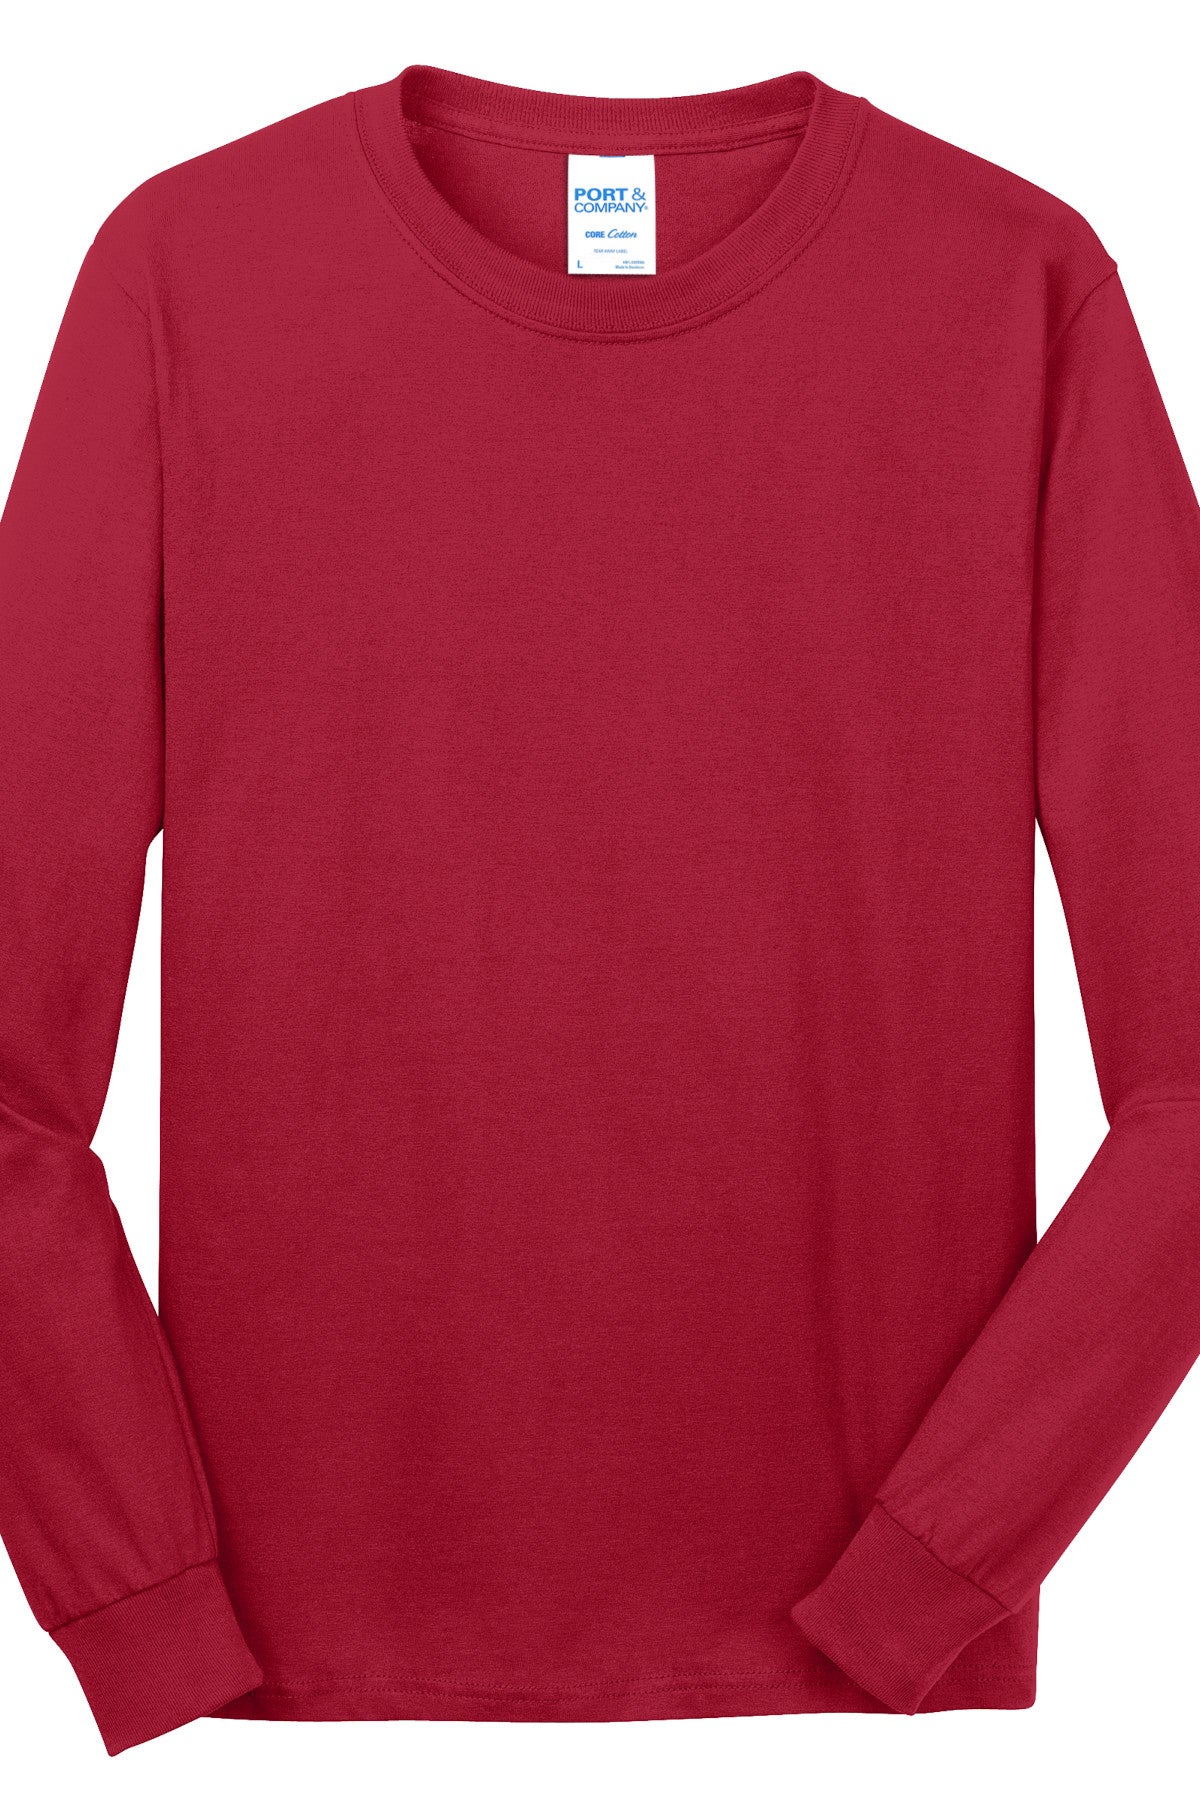 Port & Company® Pc54Ls Long Sleeve Cotton T-Shirt Ad Small / Red